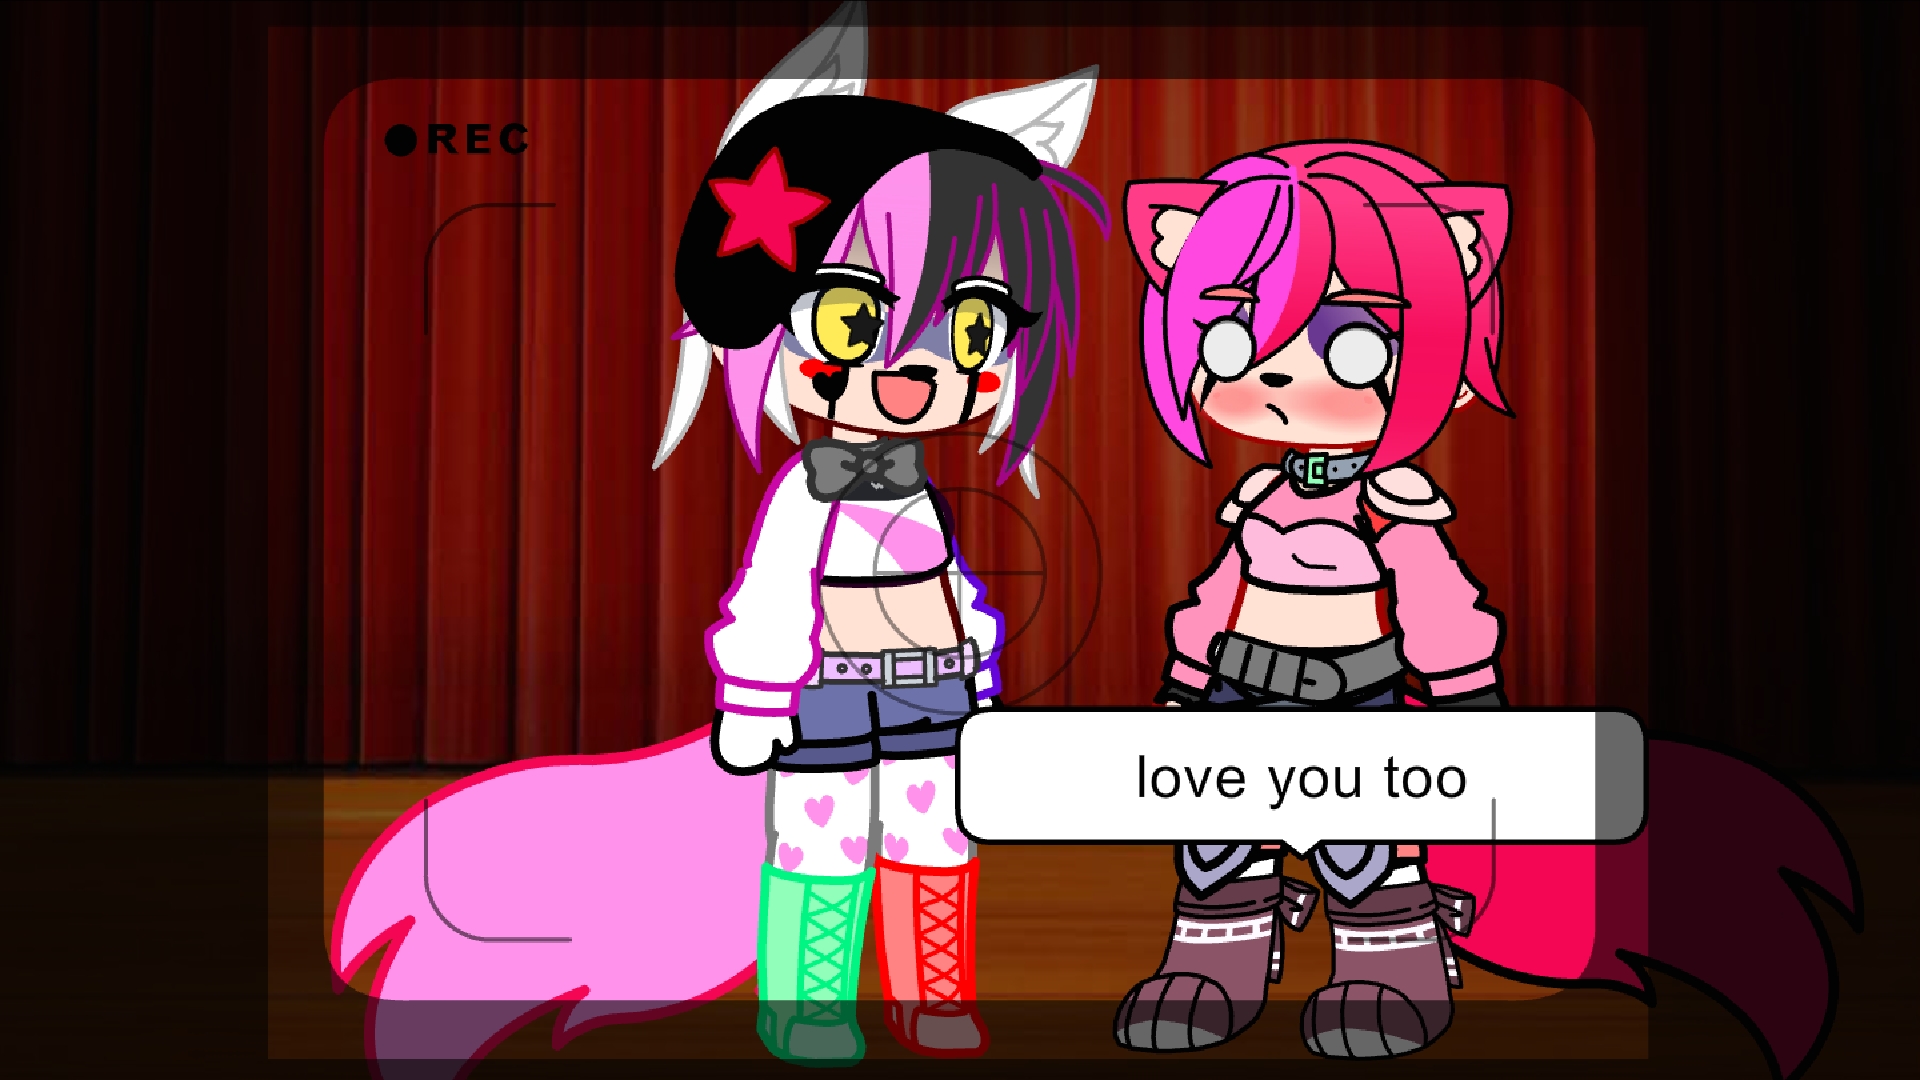 Conversation between ft.foxy and lily(oc)